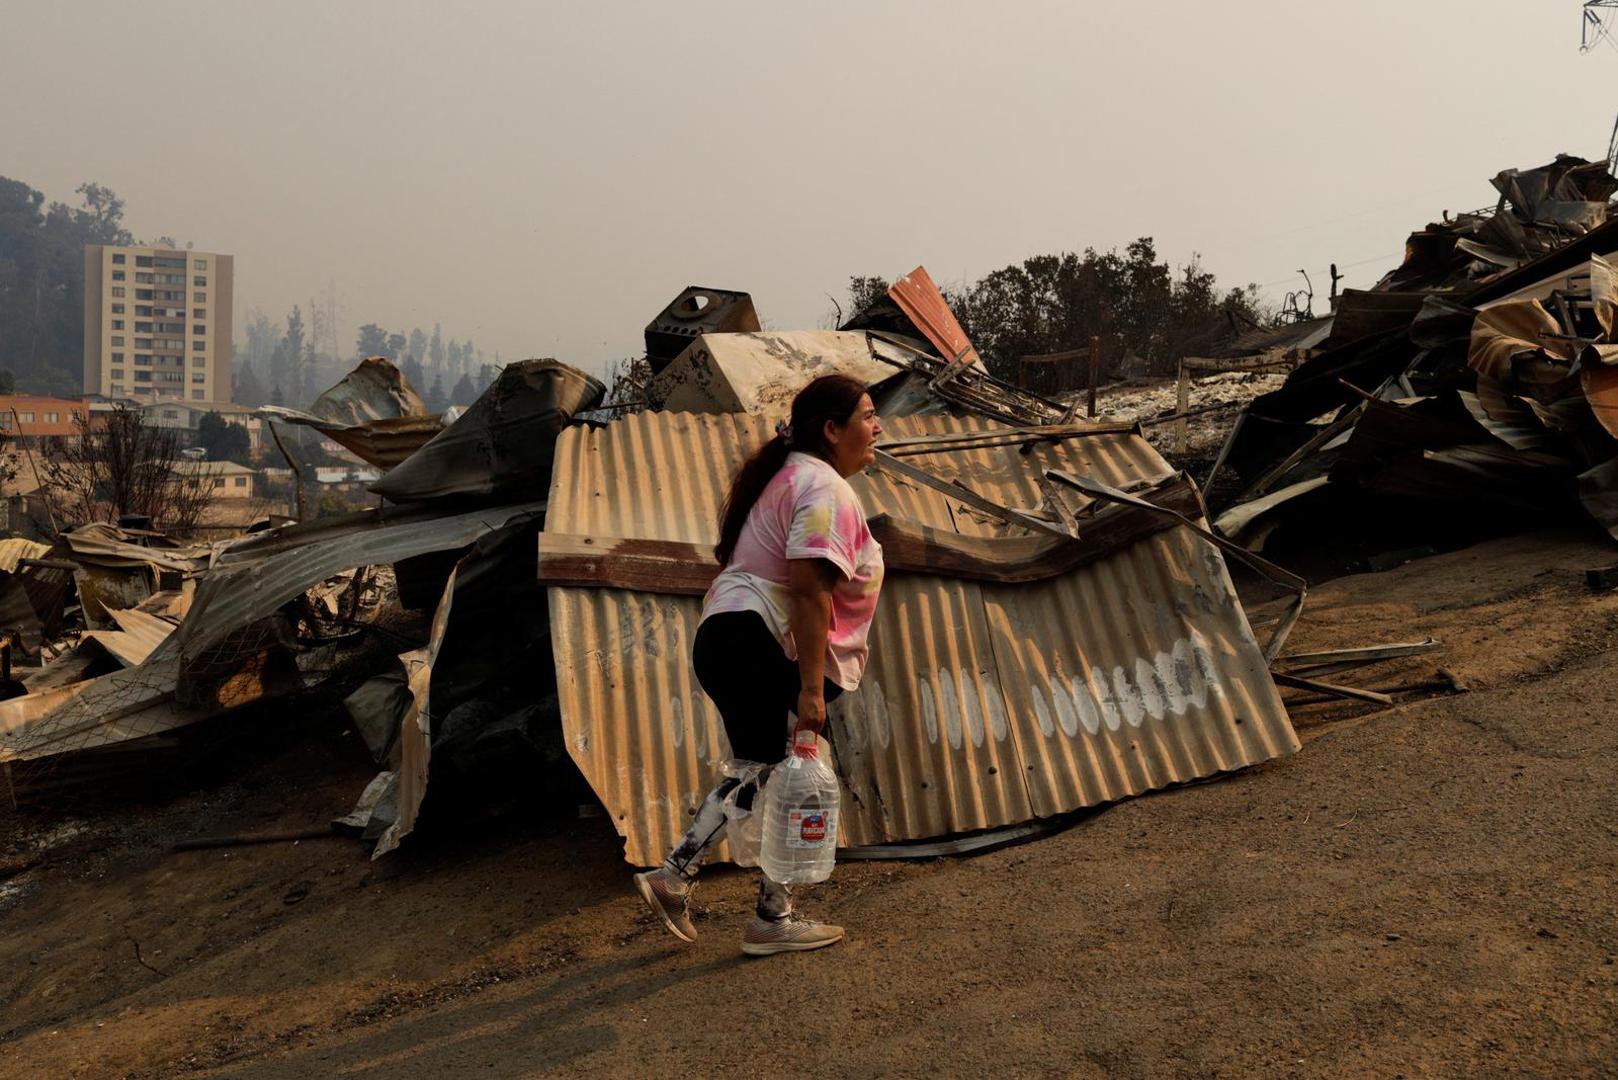 A woman walks past the remains of burnt houses following the spread of wildfires in Vina del Mar, Chile February 3, 2024. REUTERS/Sofia Yanjari Photo: SOFIA YANJARI/REUTERS